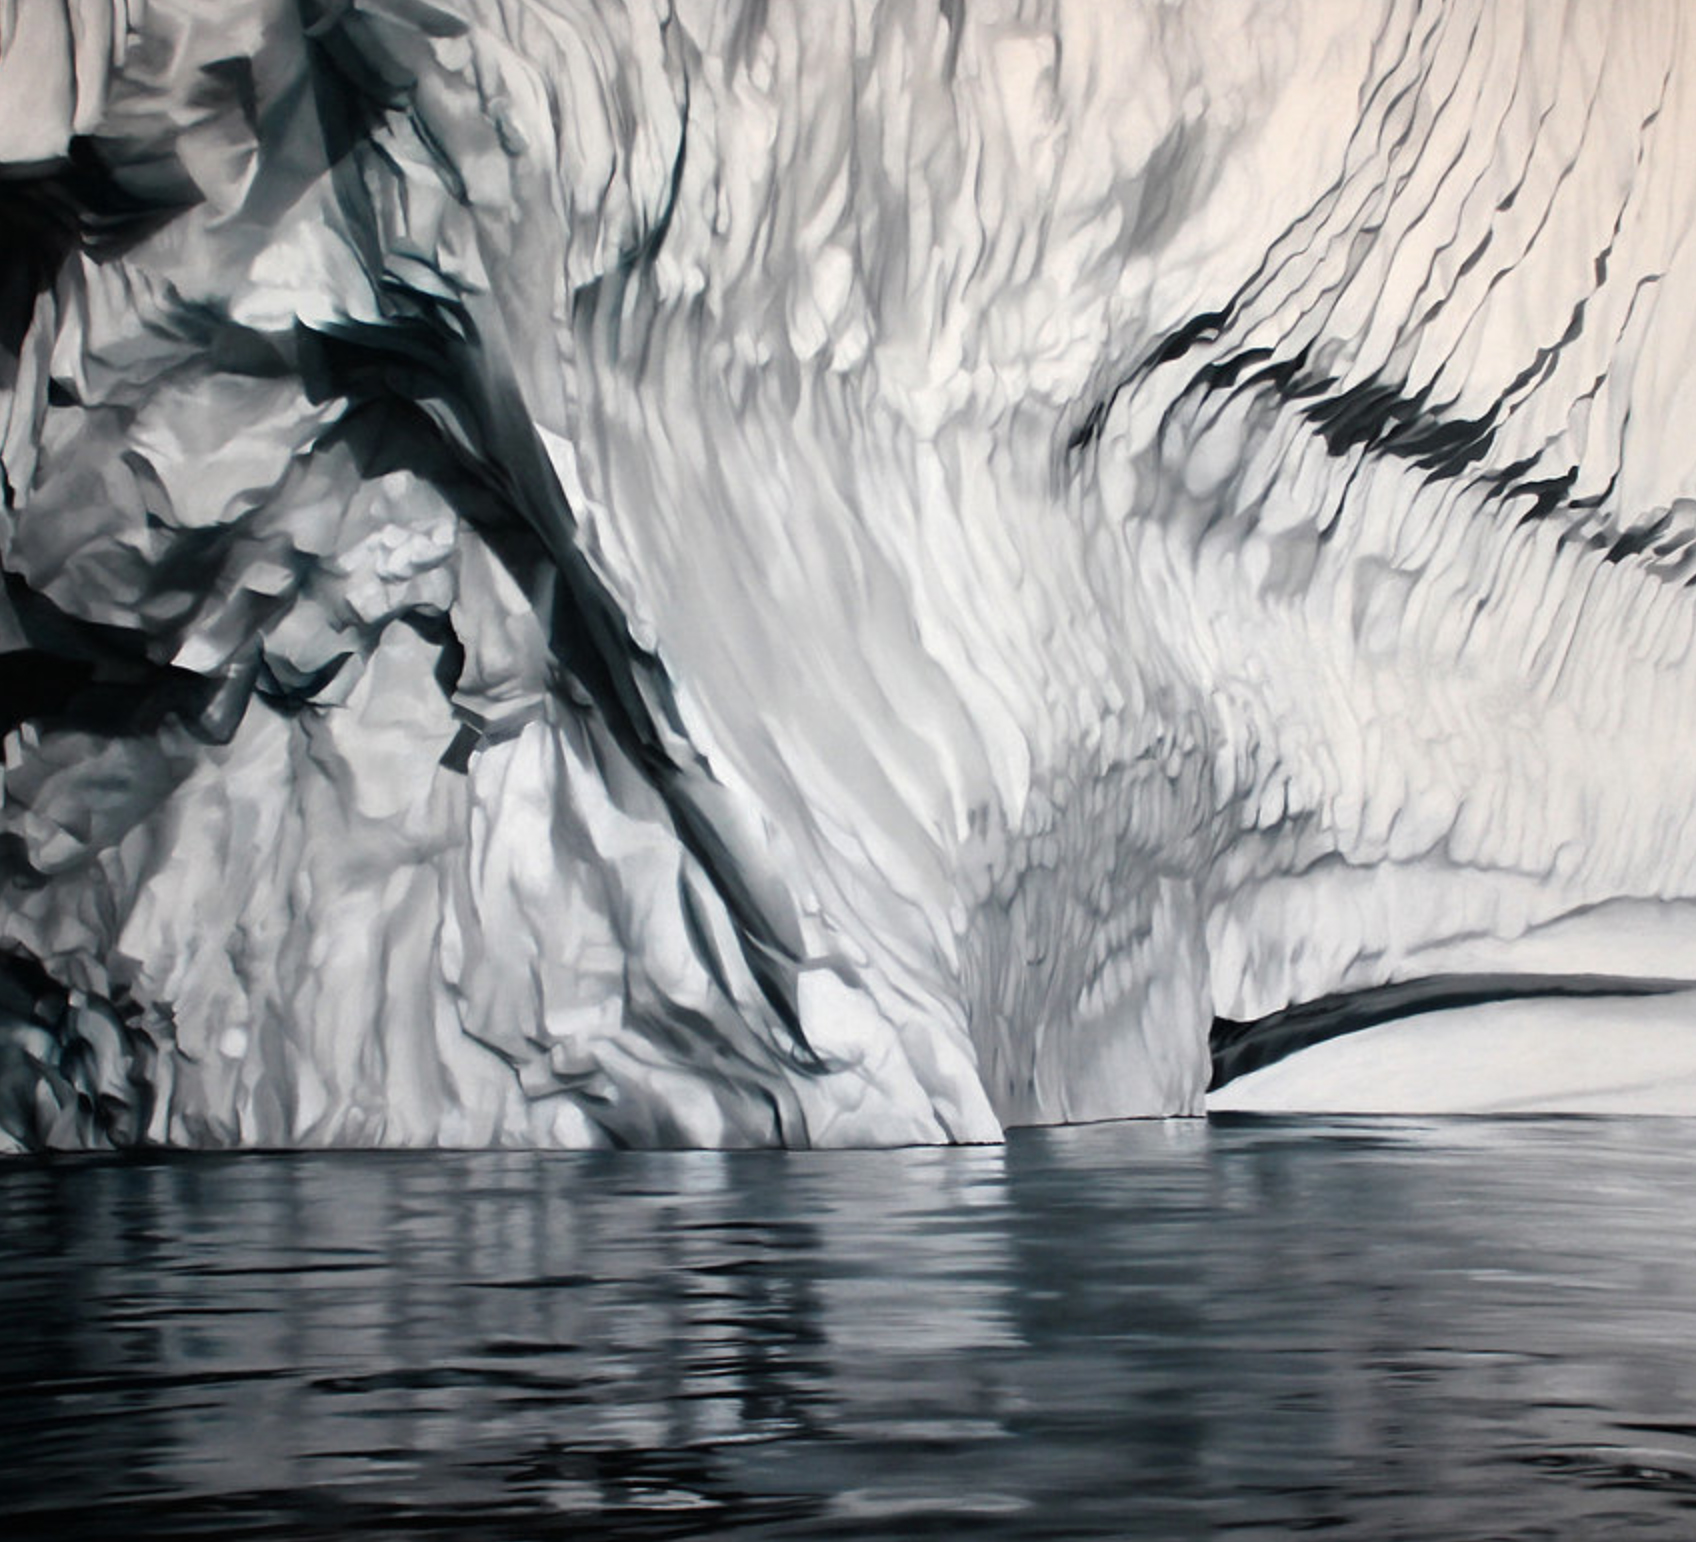 Incredible Iceberg Images Are Actually Drawn With Fingers